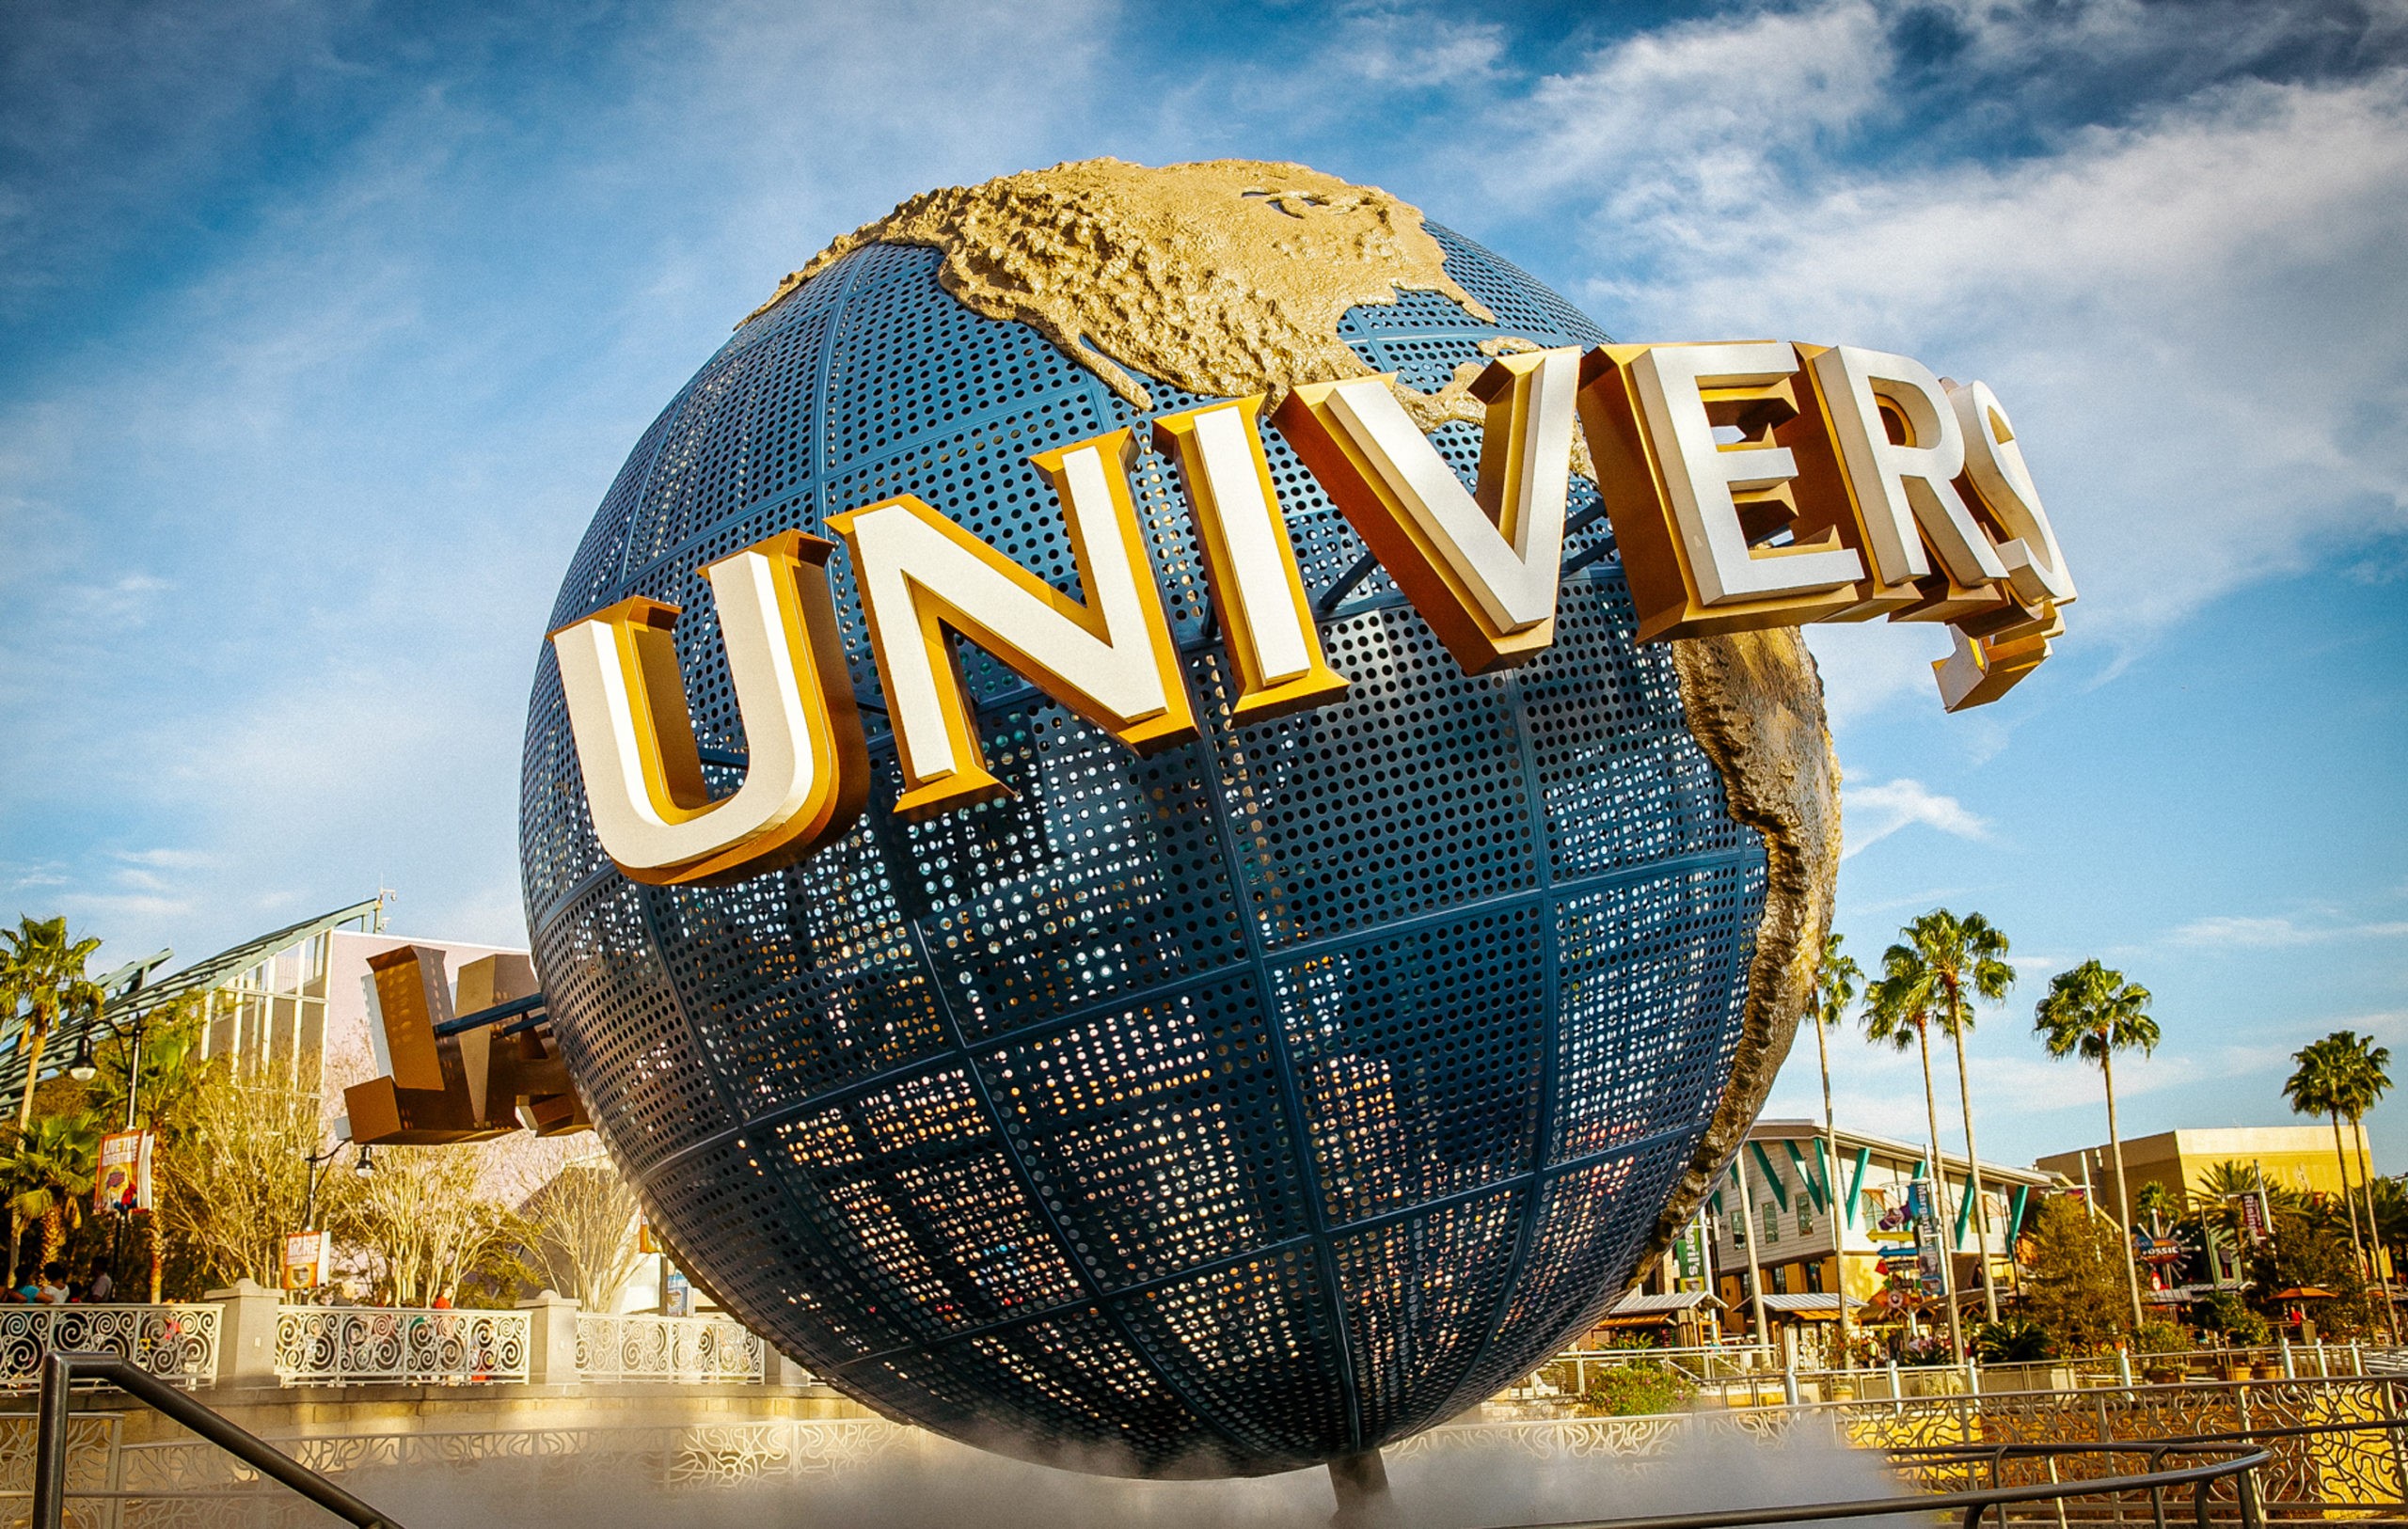 Universal Studios Park., licencja: shutterstock/By Keep Smiling Photography